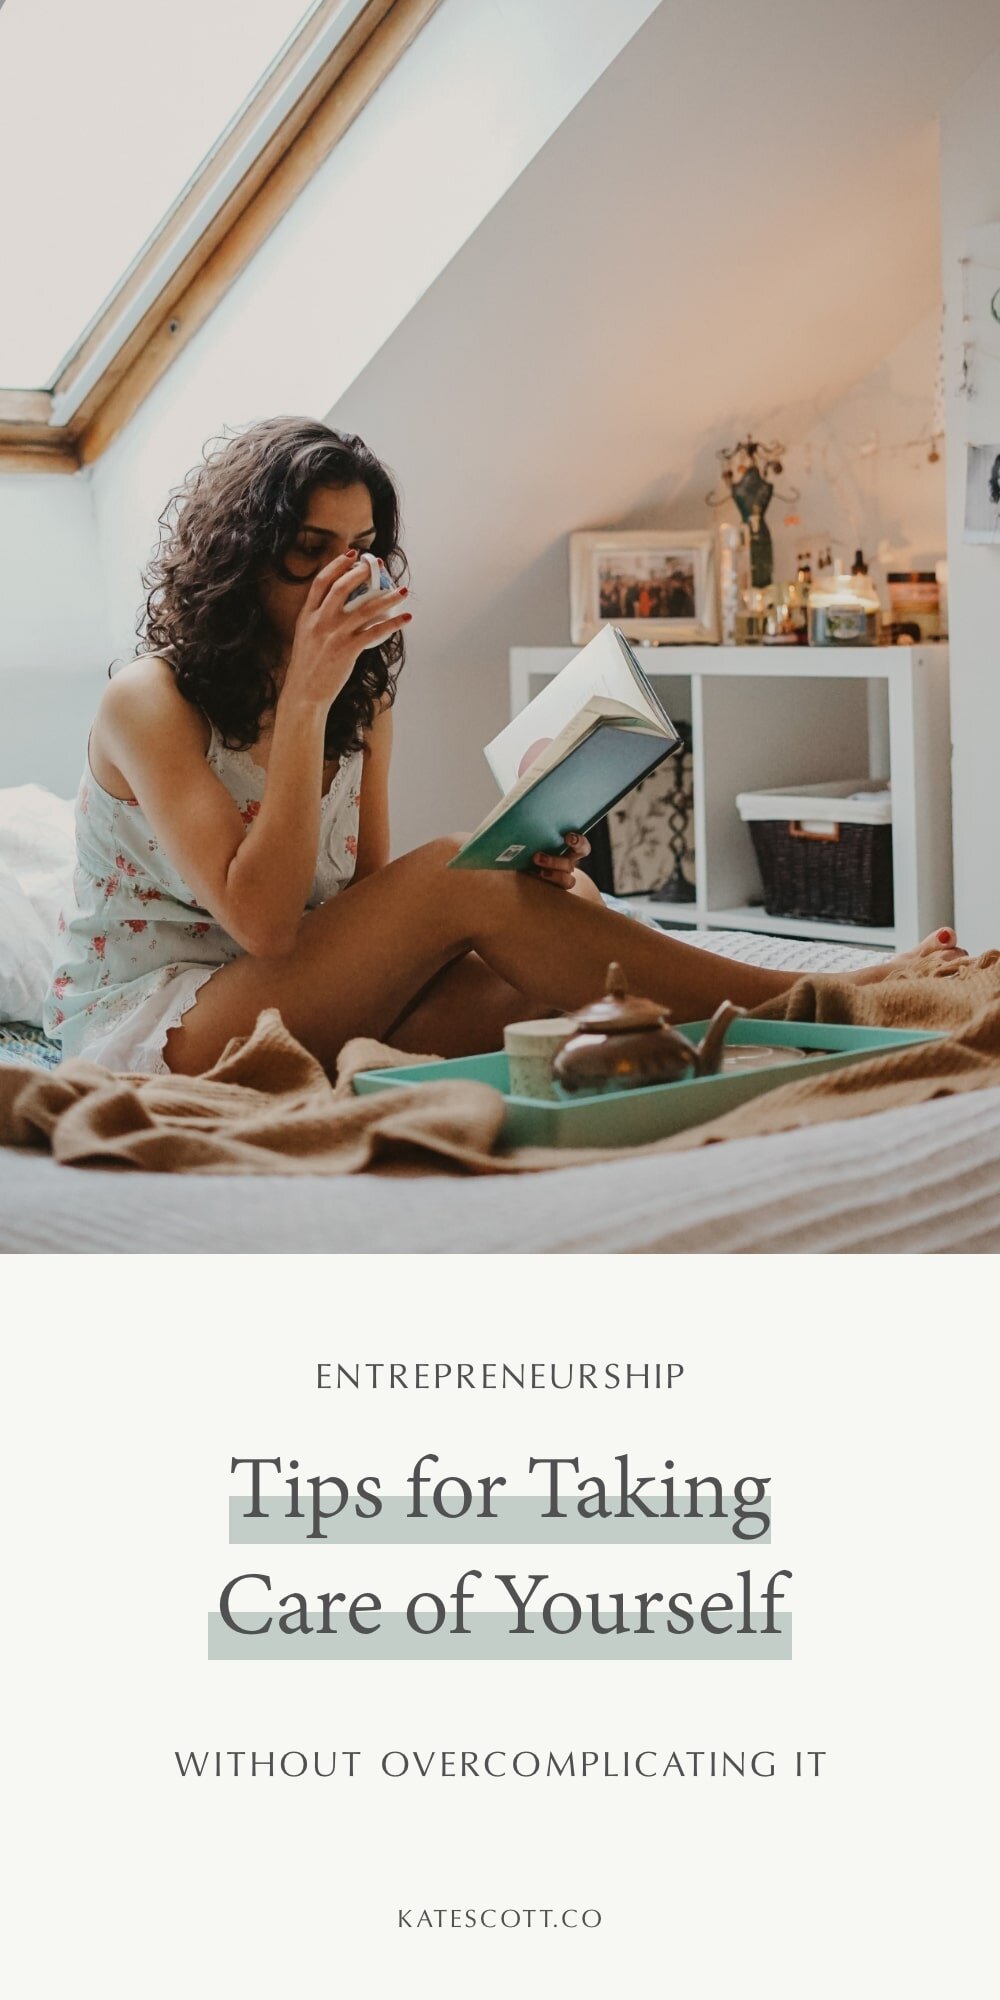 Ready for a breather? Here are 101 self-care ideas for female entrepreneurs. | Self-Care Tips | Self-Care for Entrepreneurs | Self-Care List Things to Do | Self-Care List Ideas | Women Self-Care Tips | #entrepreneur #selfcare